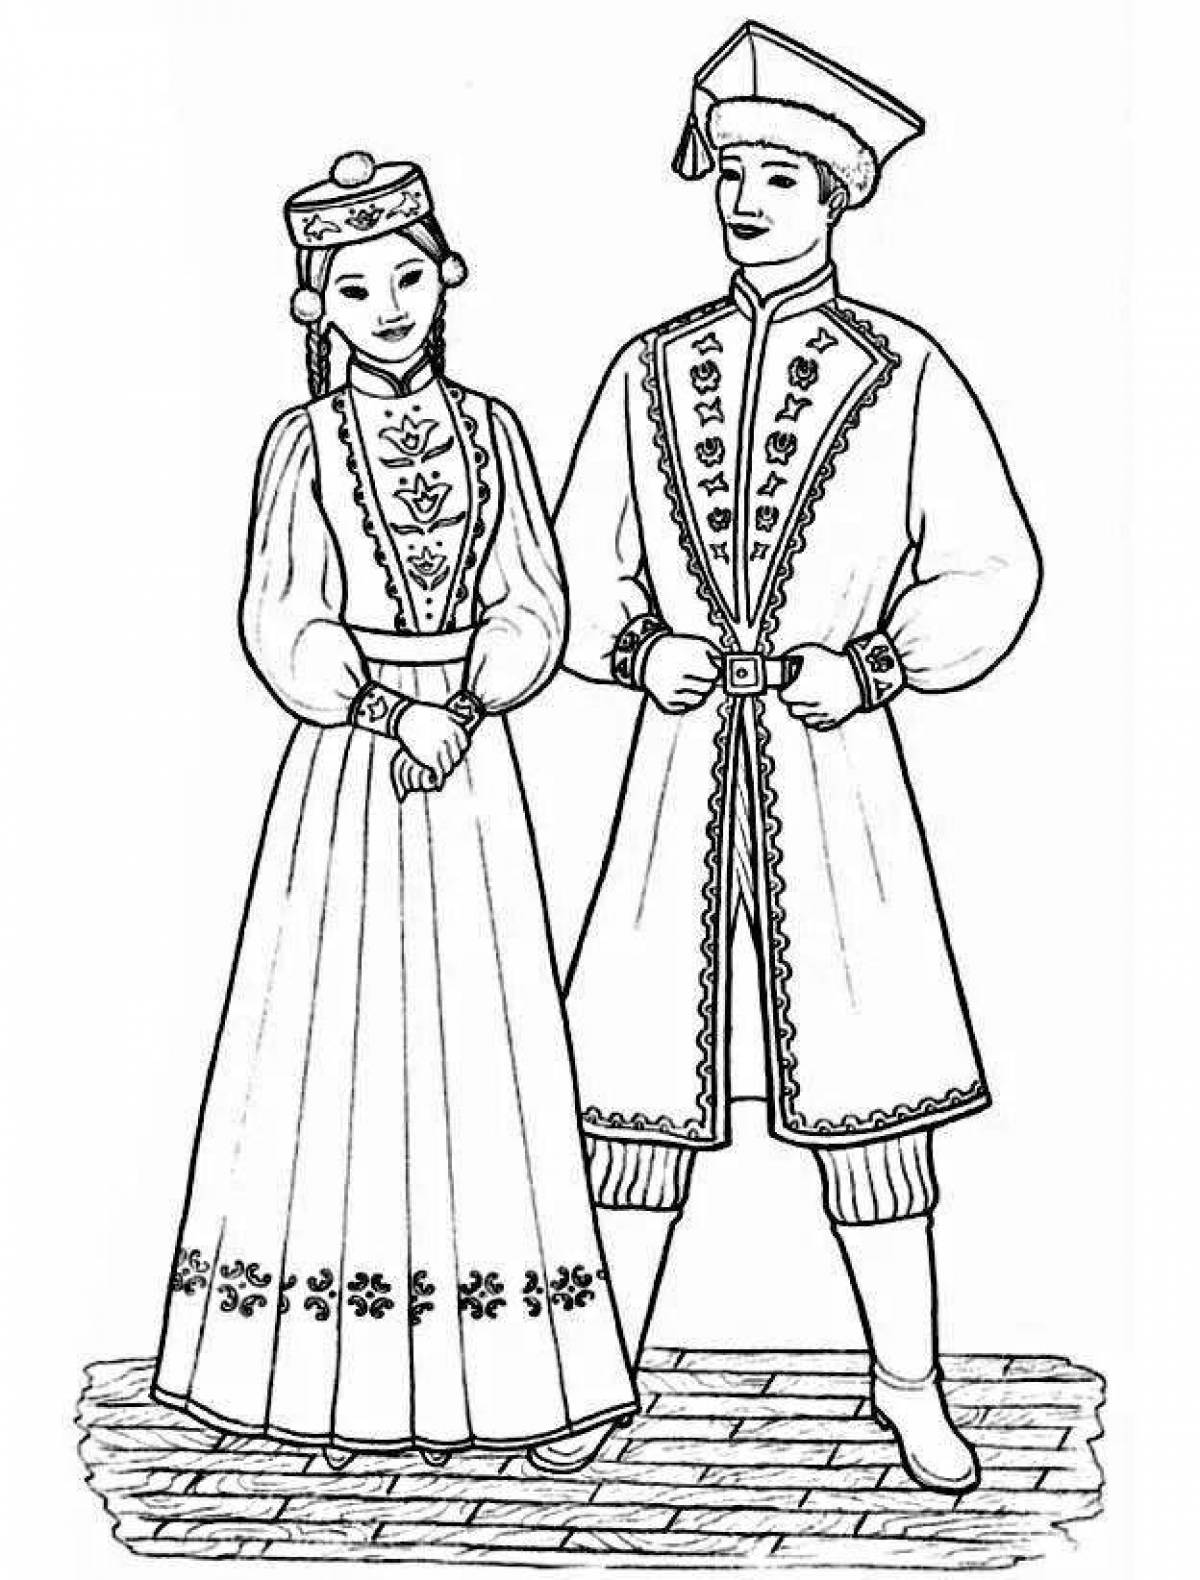 Intricate Kazakh national costume coloring book